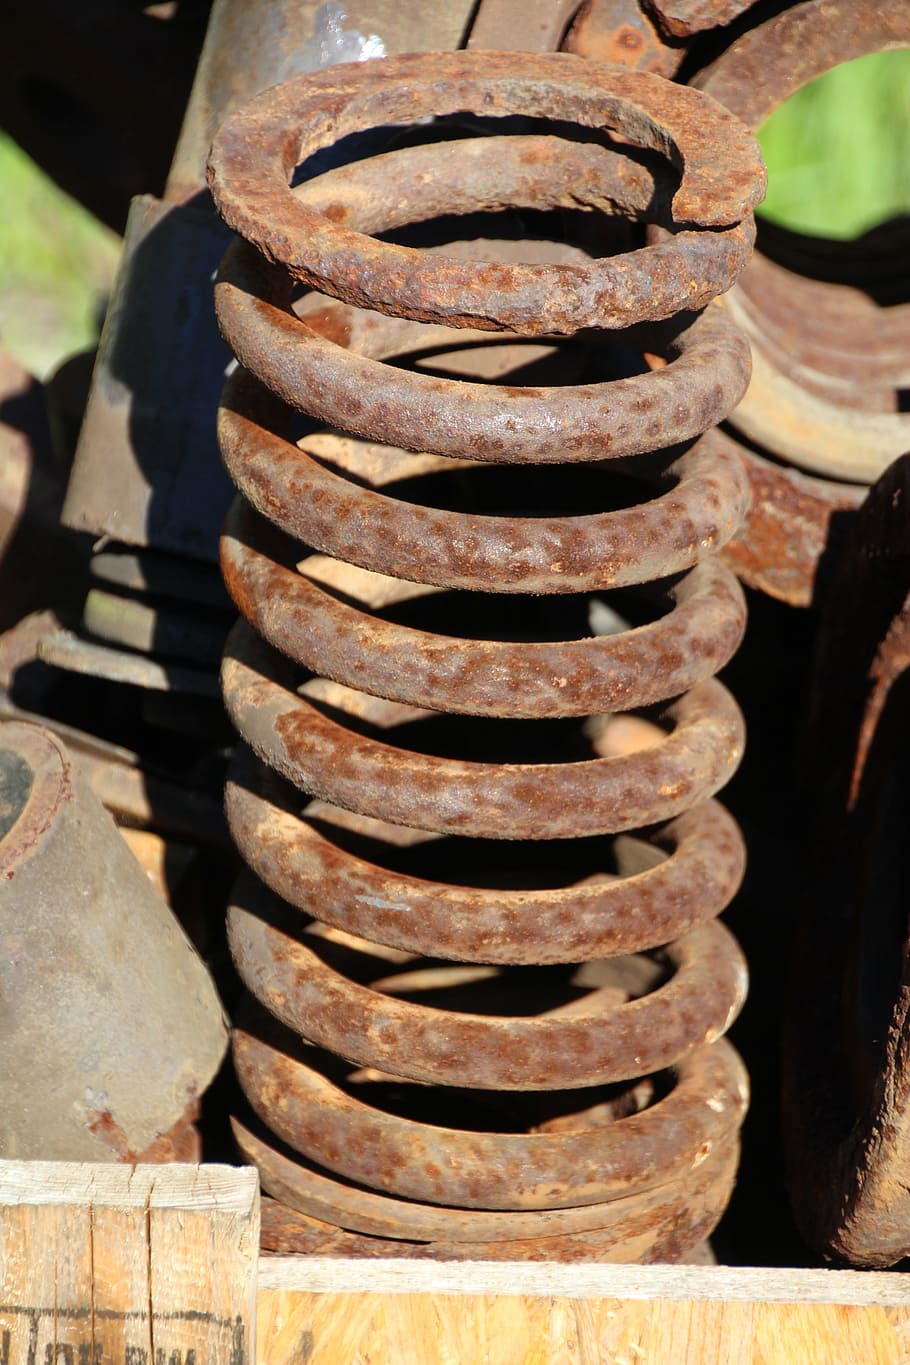 feather, railway, rusted, suspension, metal spring, metal, machinery, focus on foreground, stack, day